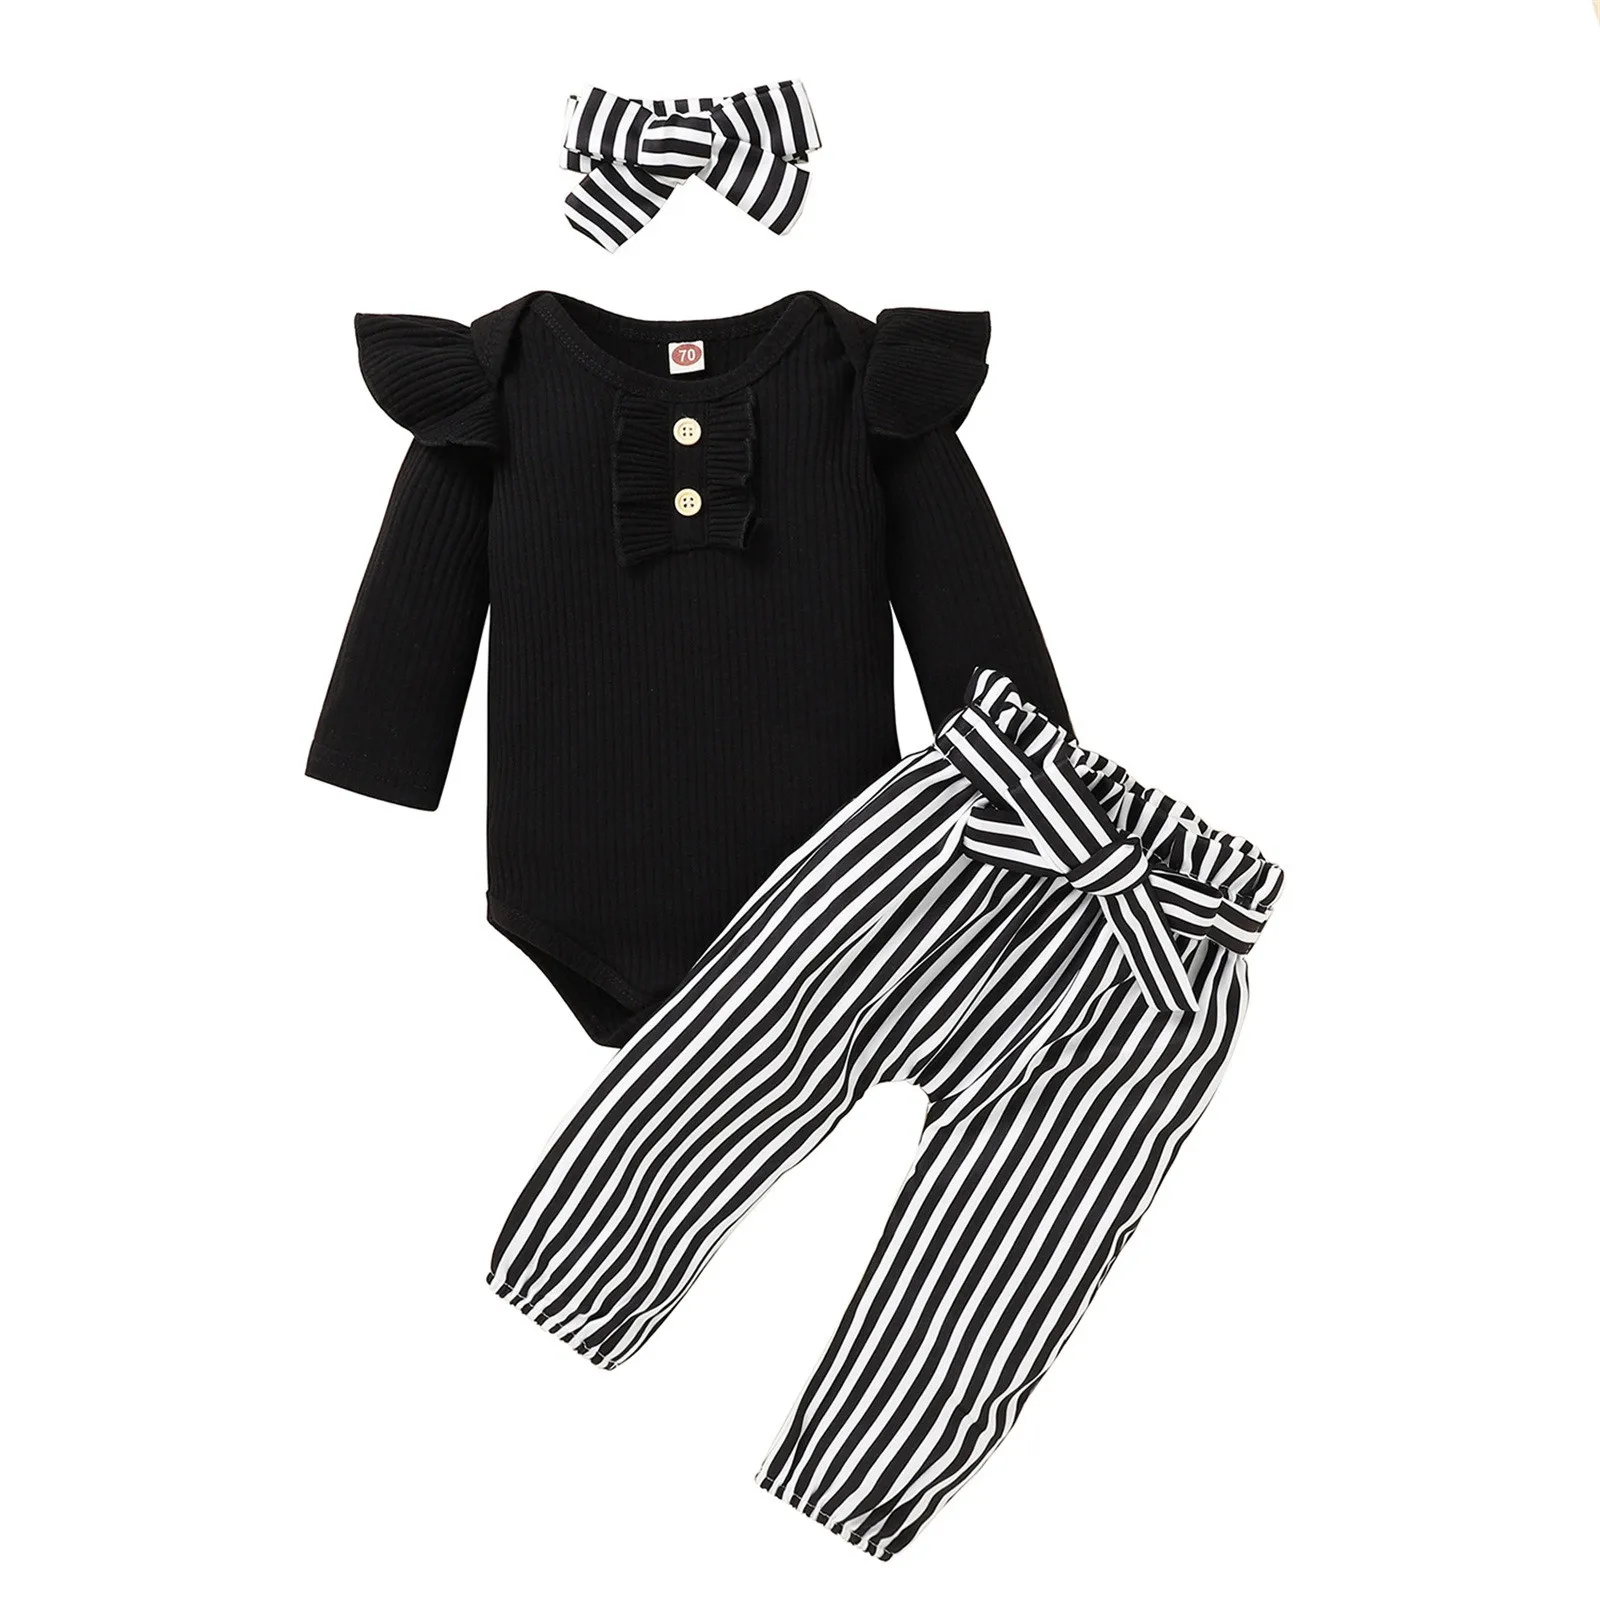 

3PCS Newborn Baby Girls Autumn Clothes Set Ribbed Romper Bodysuit Tops+Striped Pants+Headband Outfits Toddler New Born Kids Sets